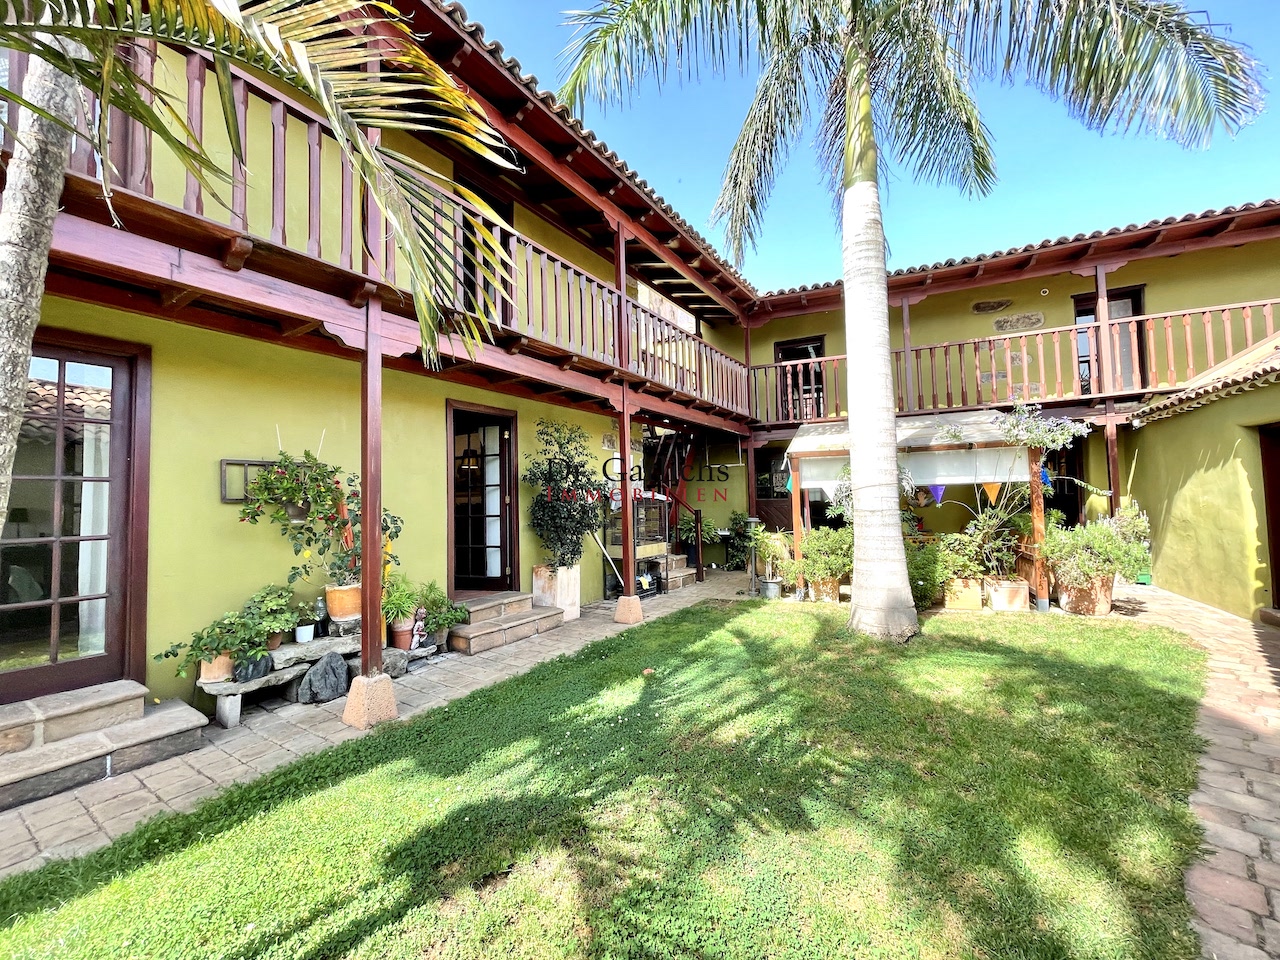 Patio house with 4 units in La Guancha